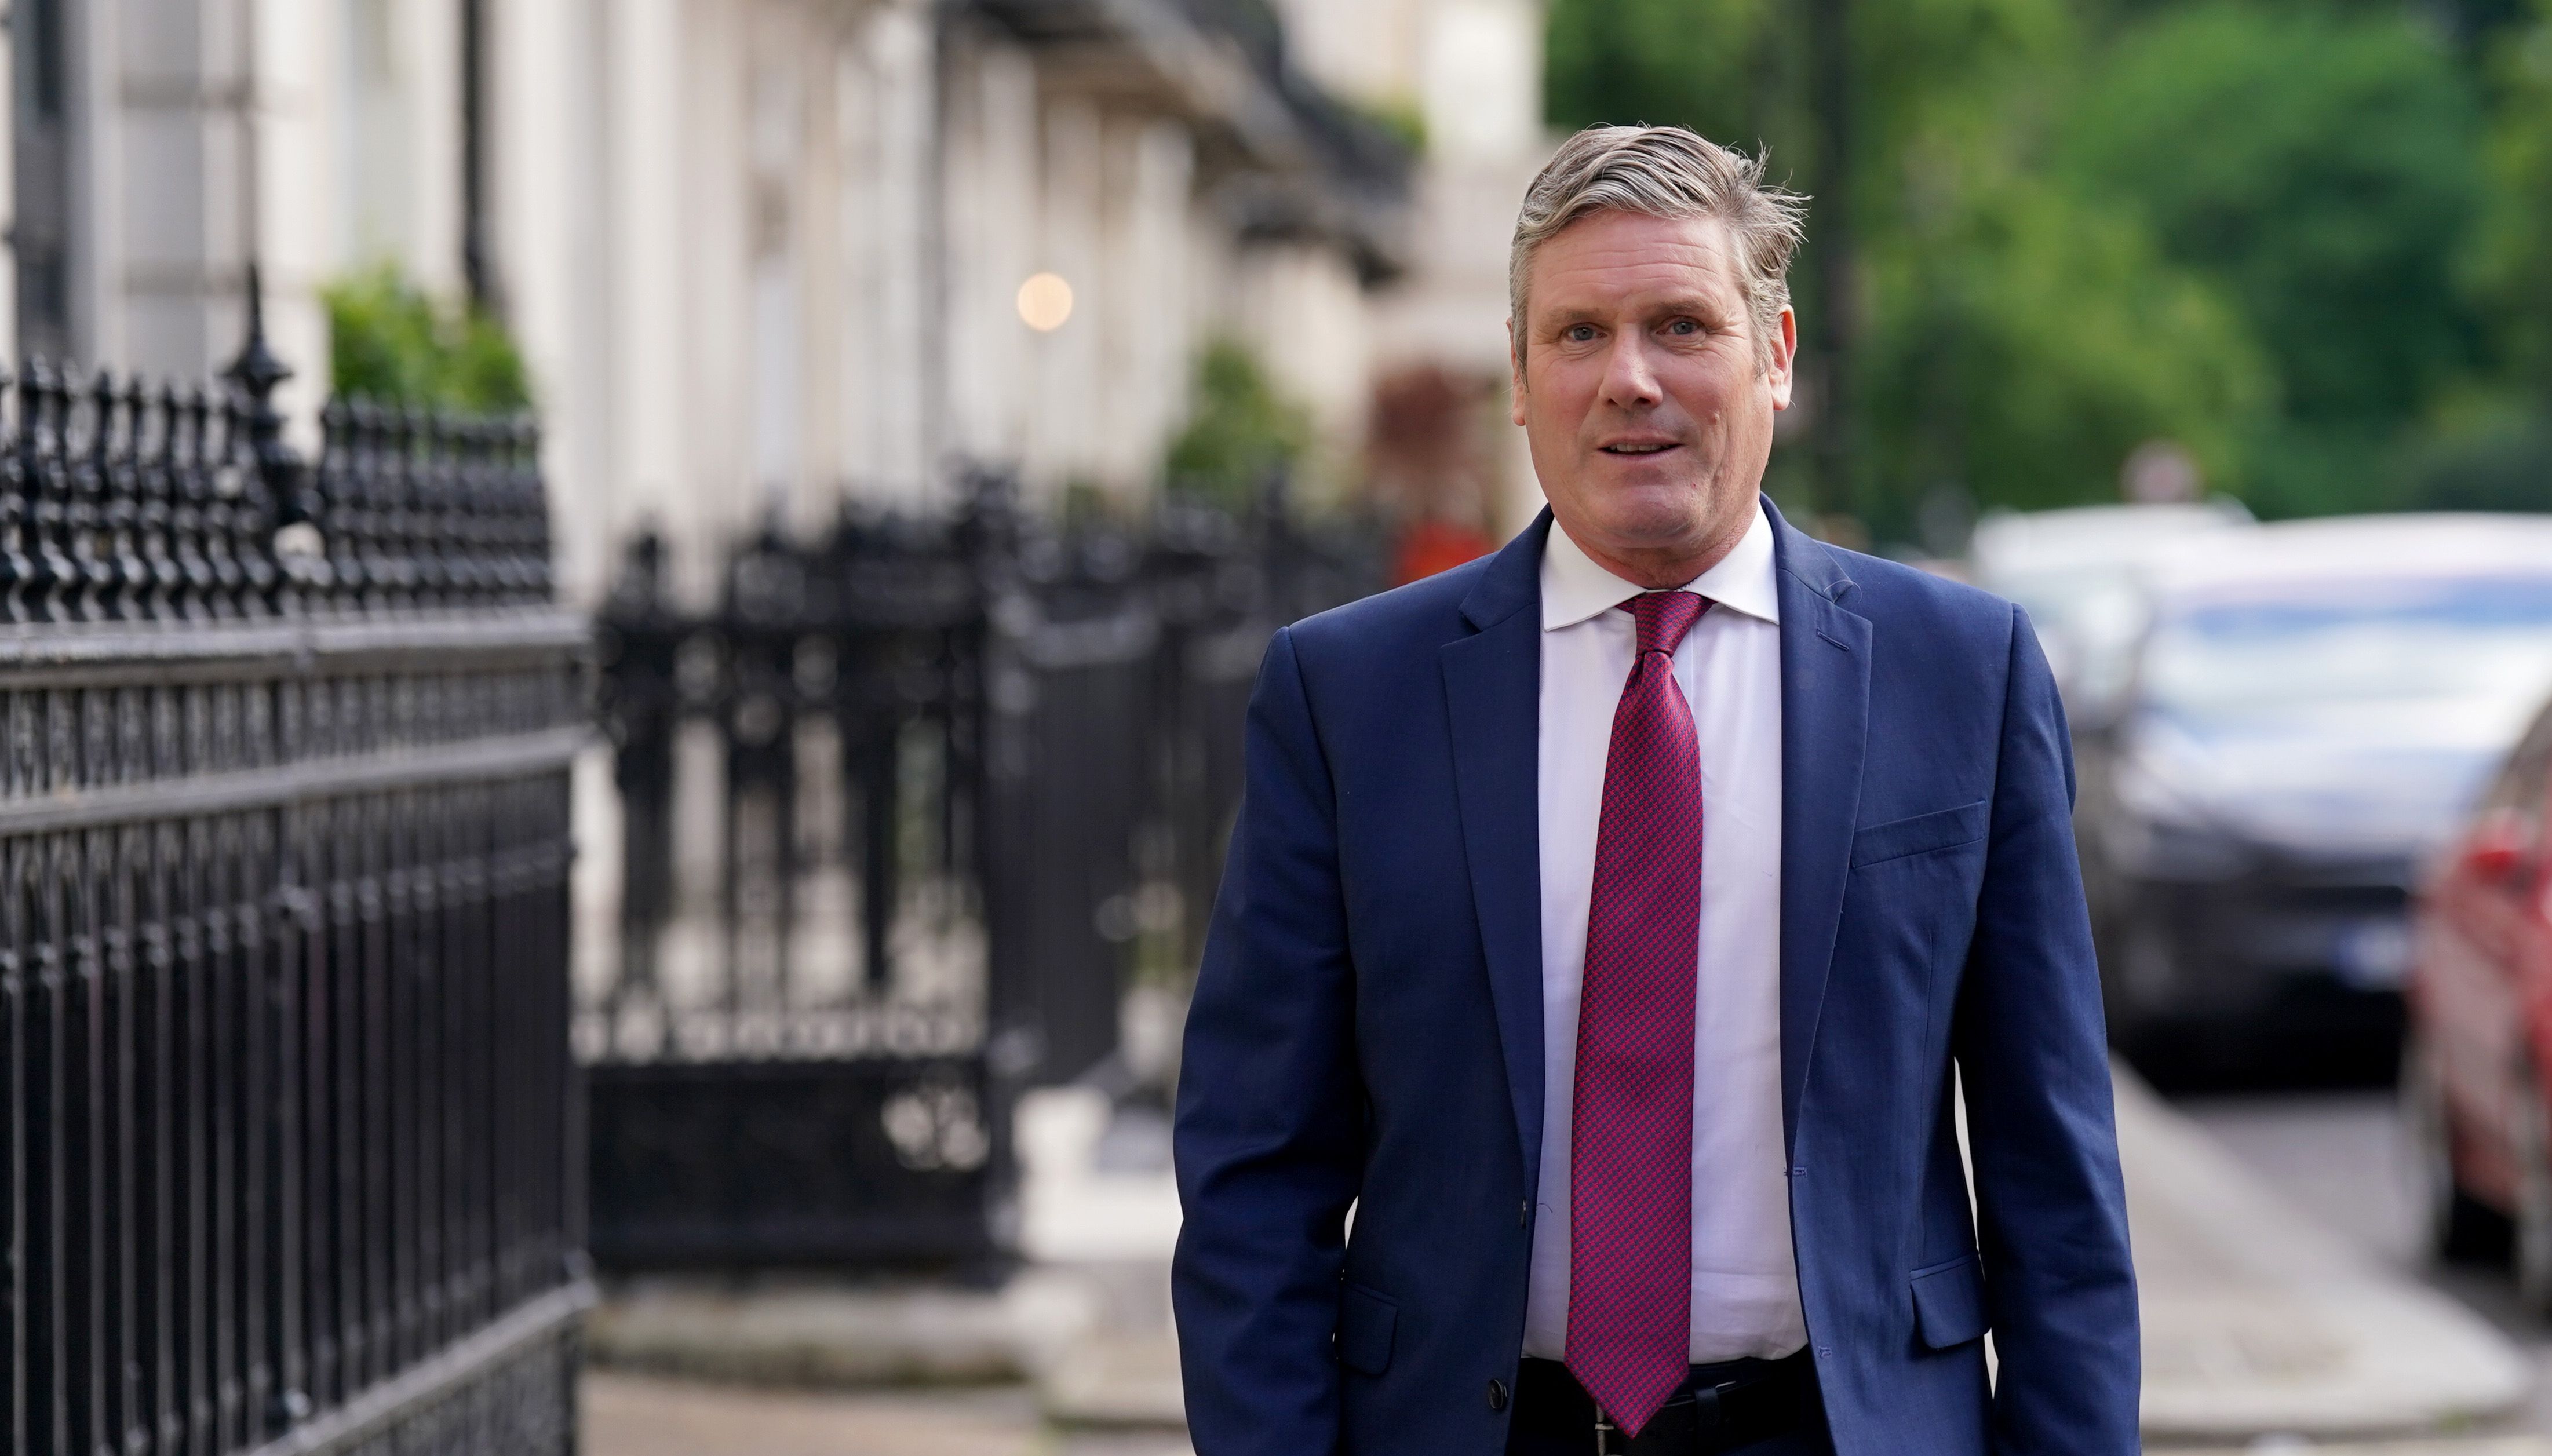 Sir Keir Starmer's party initially motioned a no confidence vote against the Conservatives